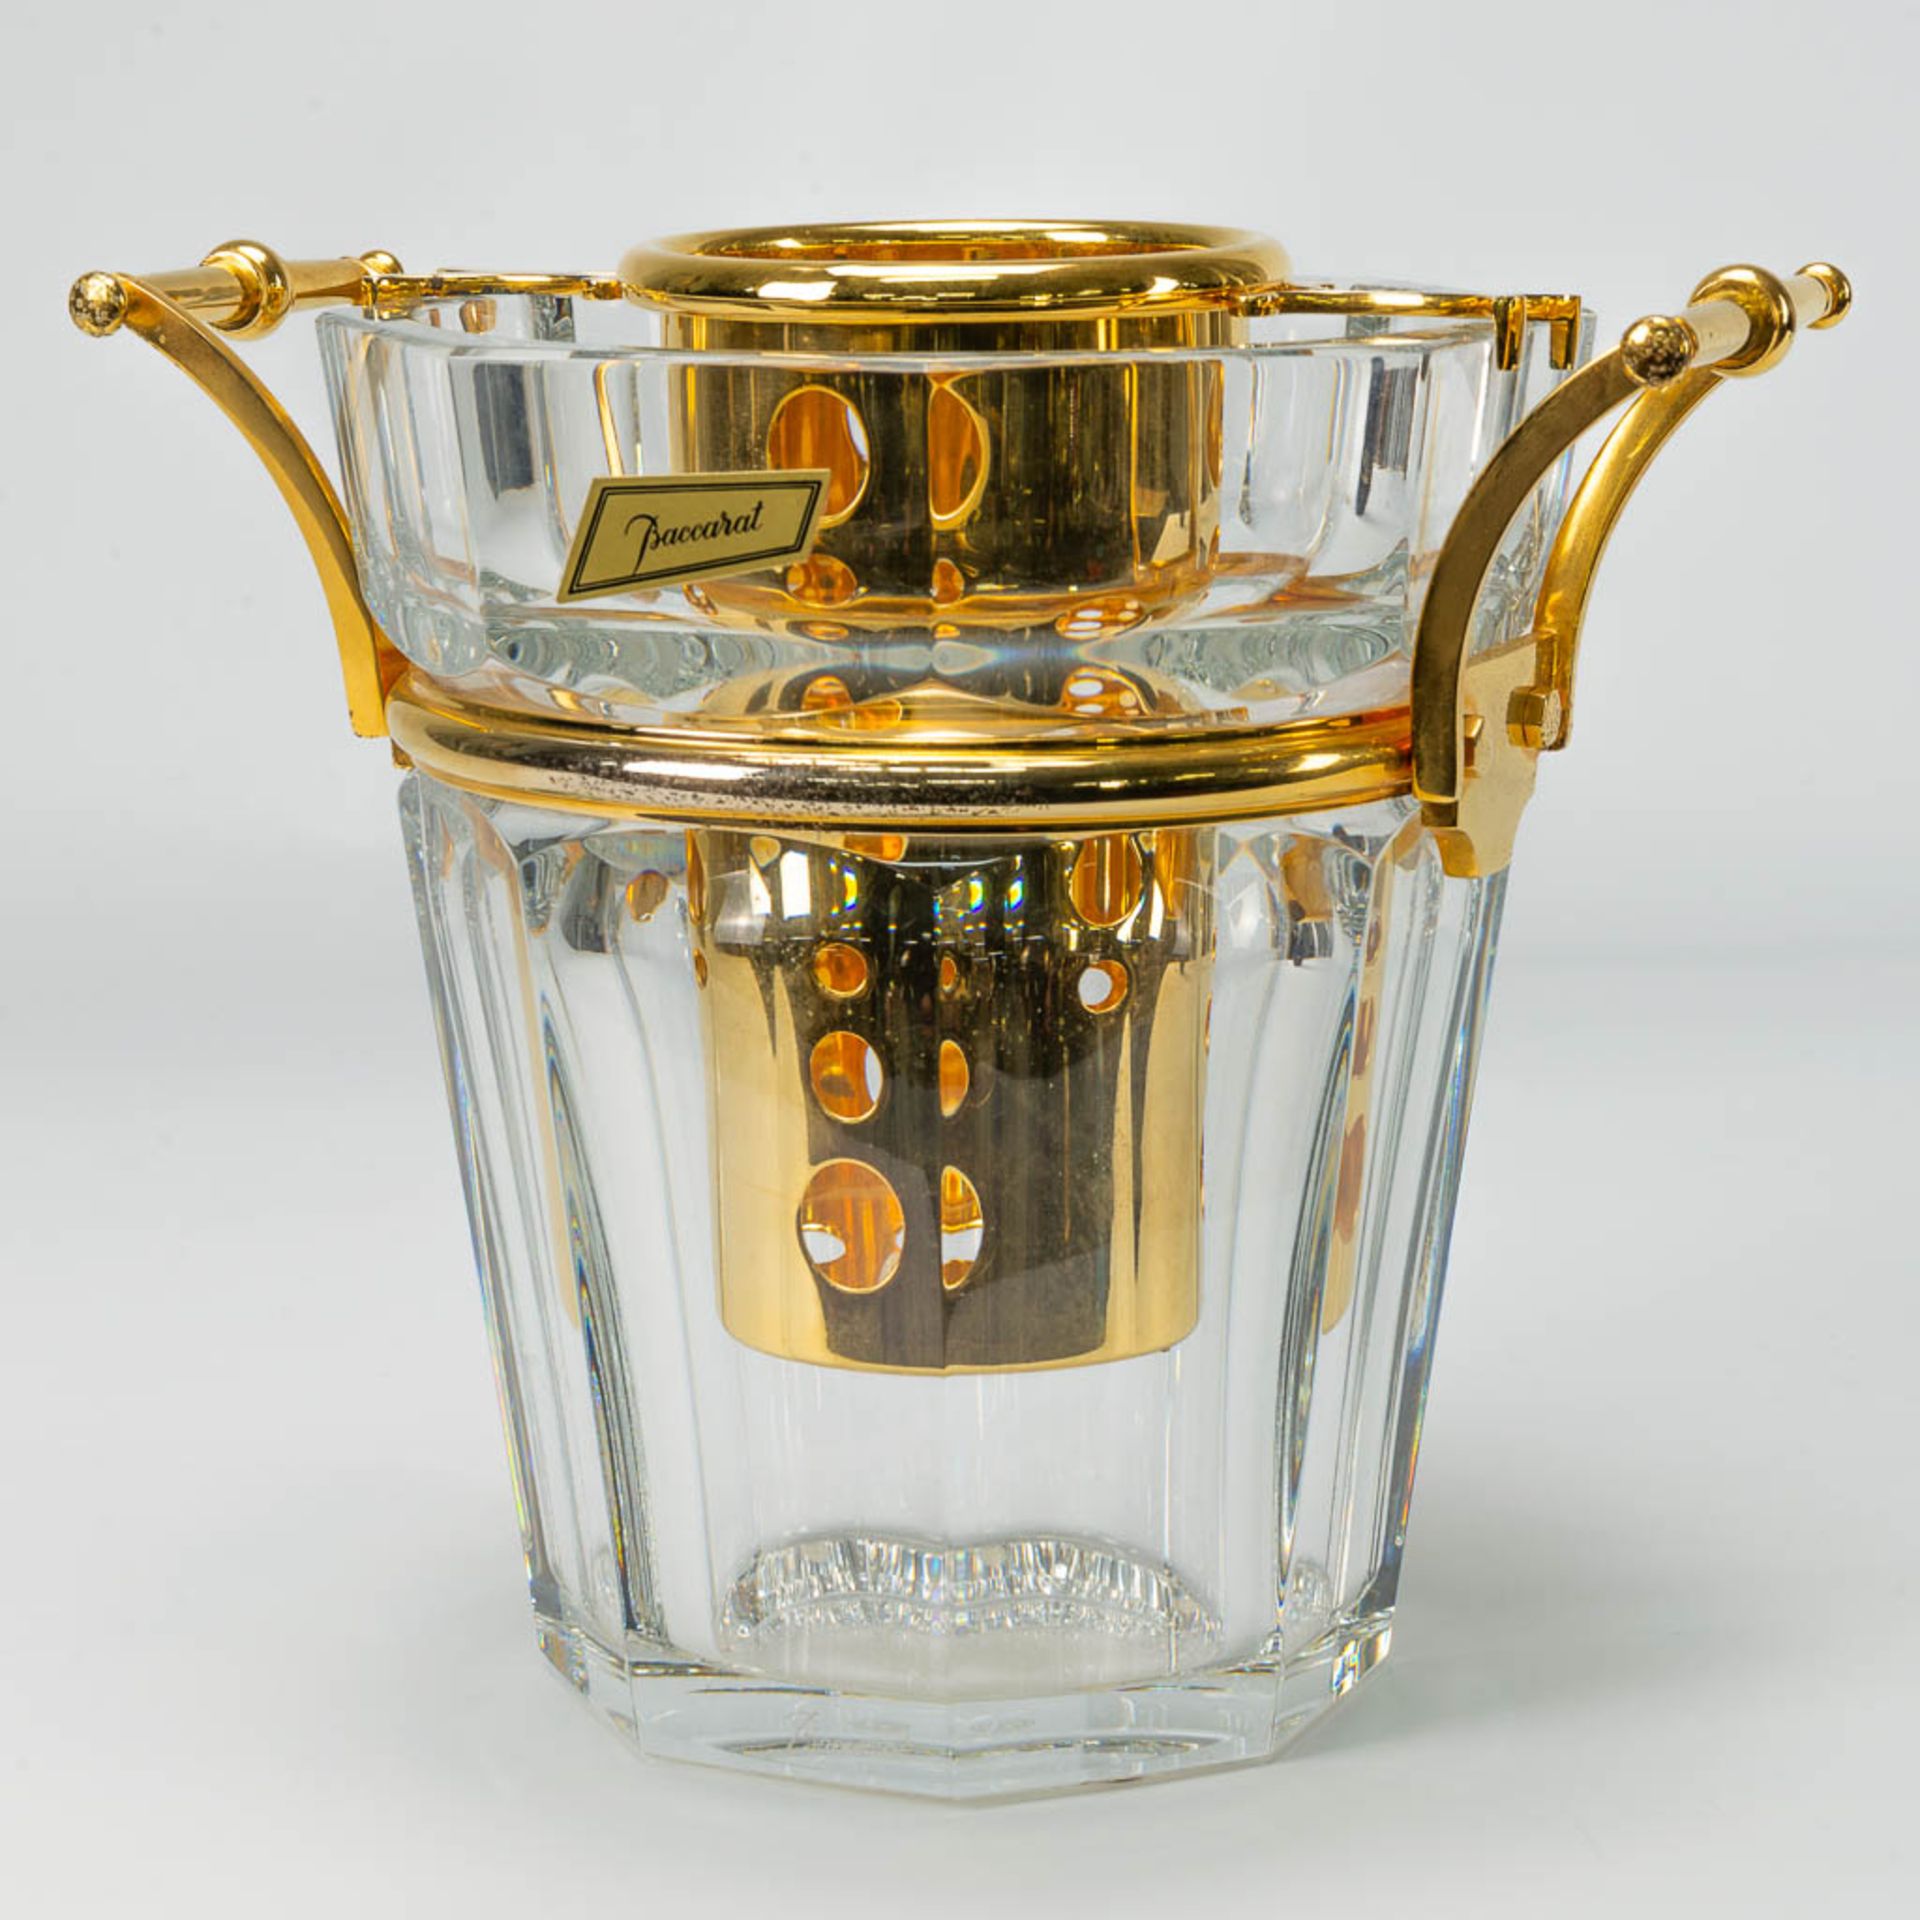 A Baccarat wine cooler or Champage bucket, made of Crystal with gold plated metal in the original bo - Image 4 of 12